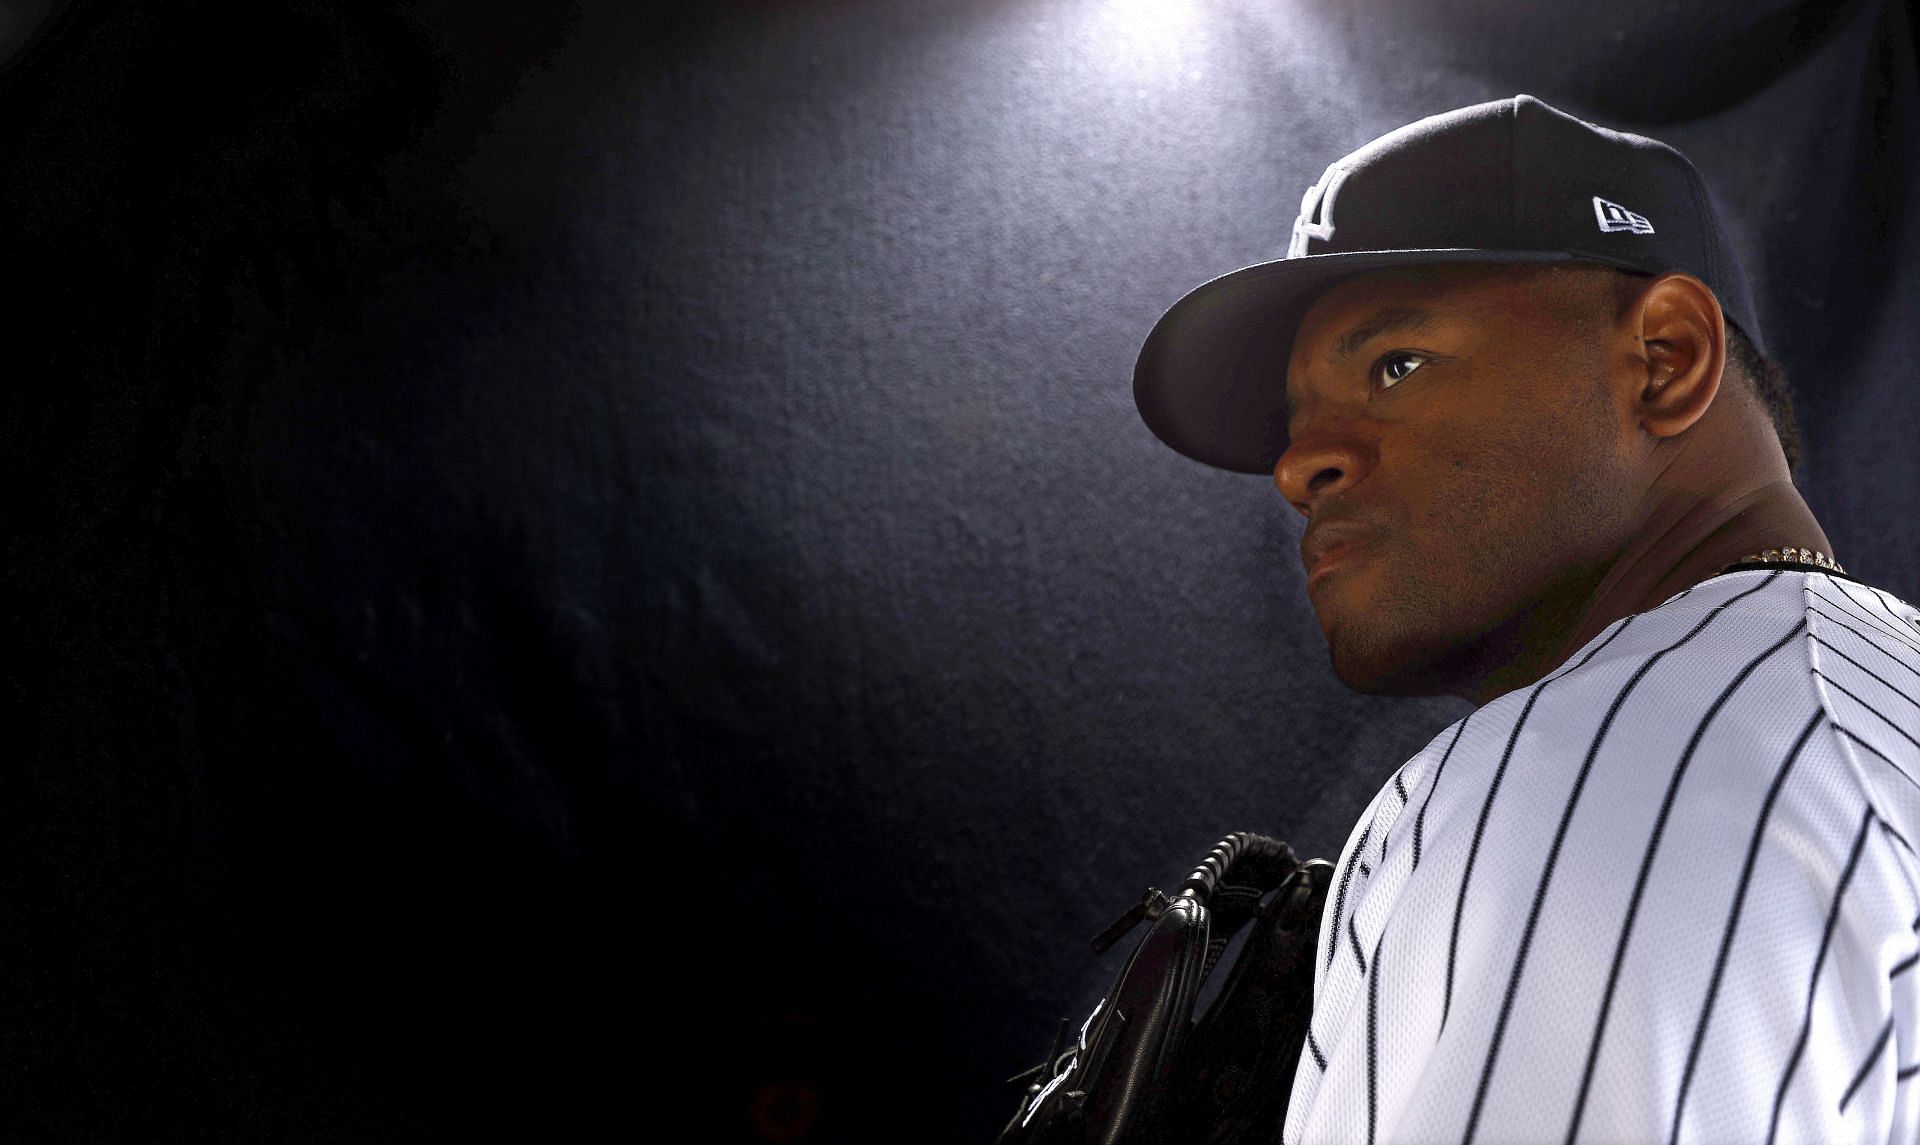 In his first spring training outing since 2018, Yankees' Luis Severino  finds nerves, velocity - The Athletic